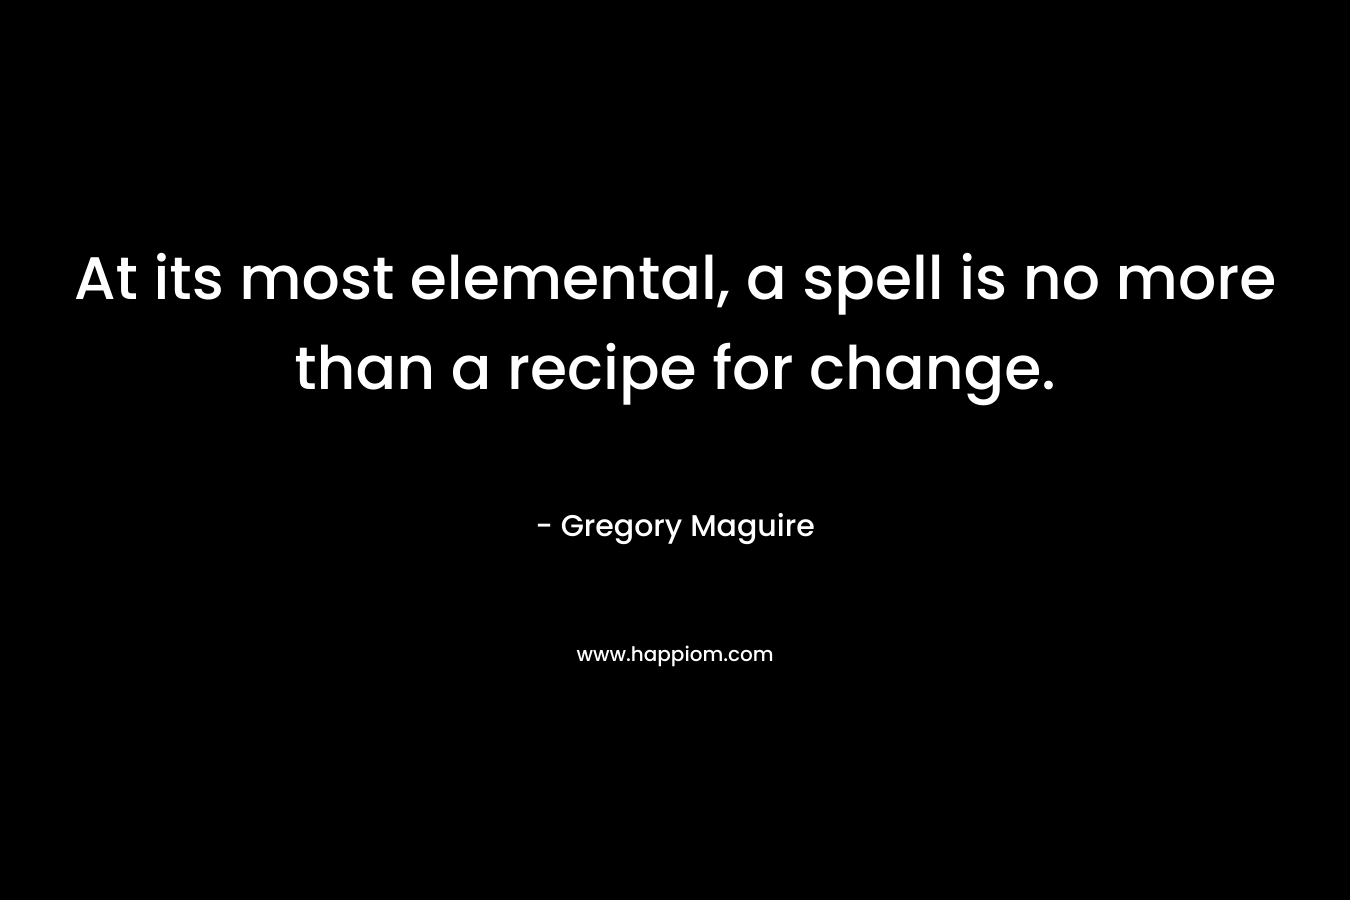 At its most elemental, a spell is no more than a recipe for change.